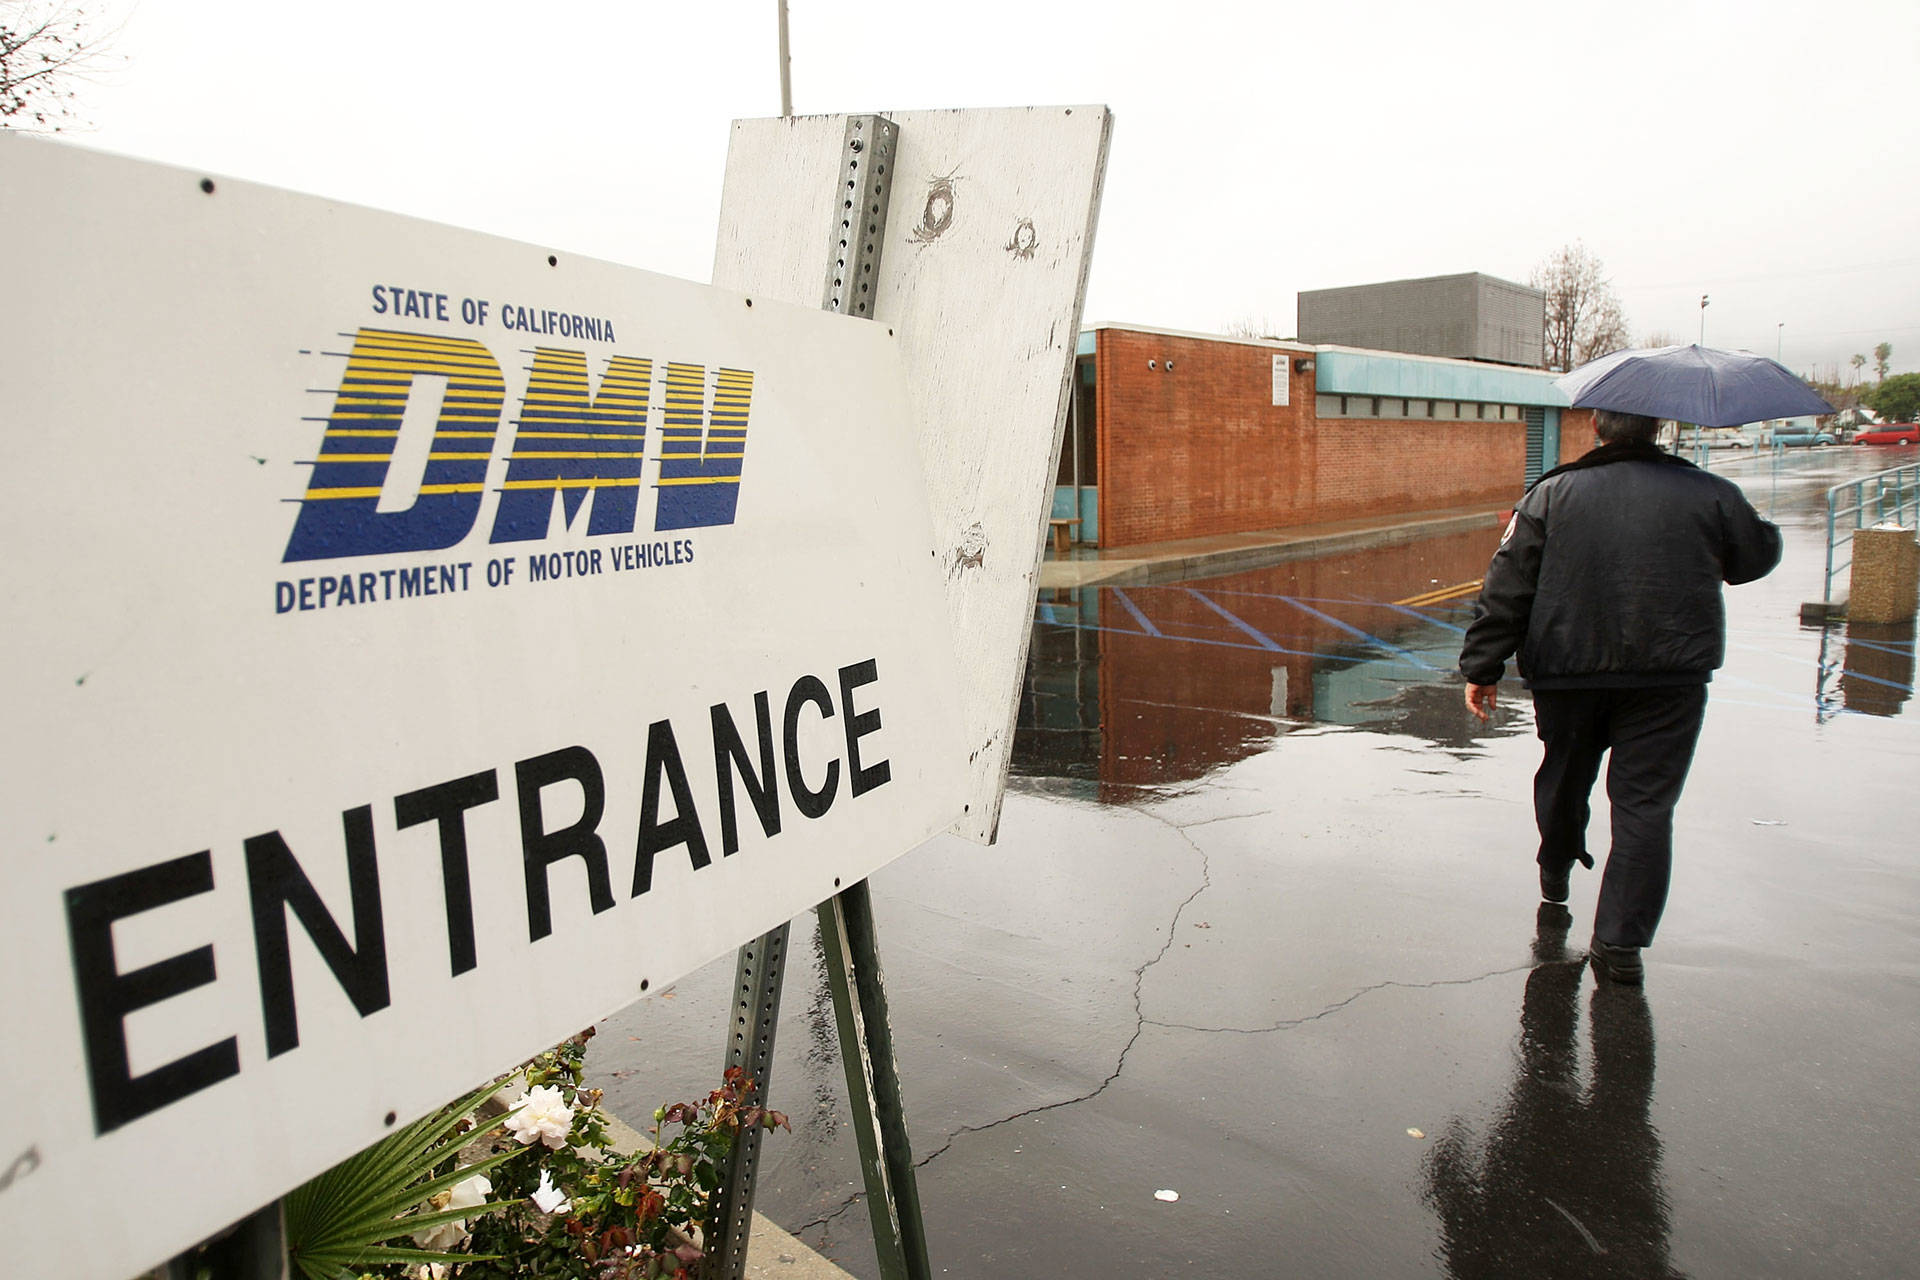 A security guard outside a California DMV office in Pasadena. David McNew/Getty Images